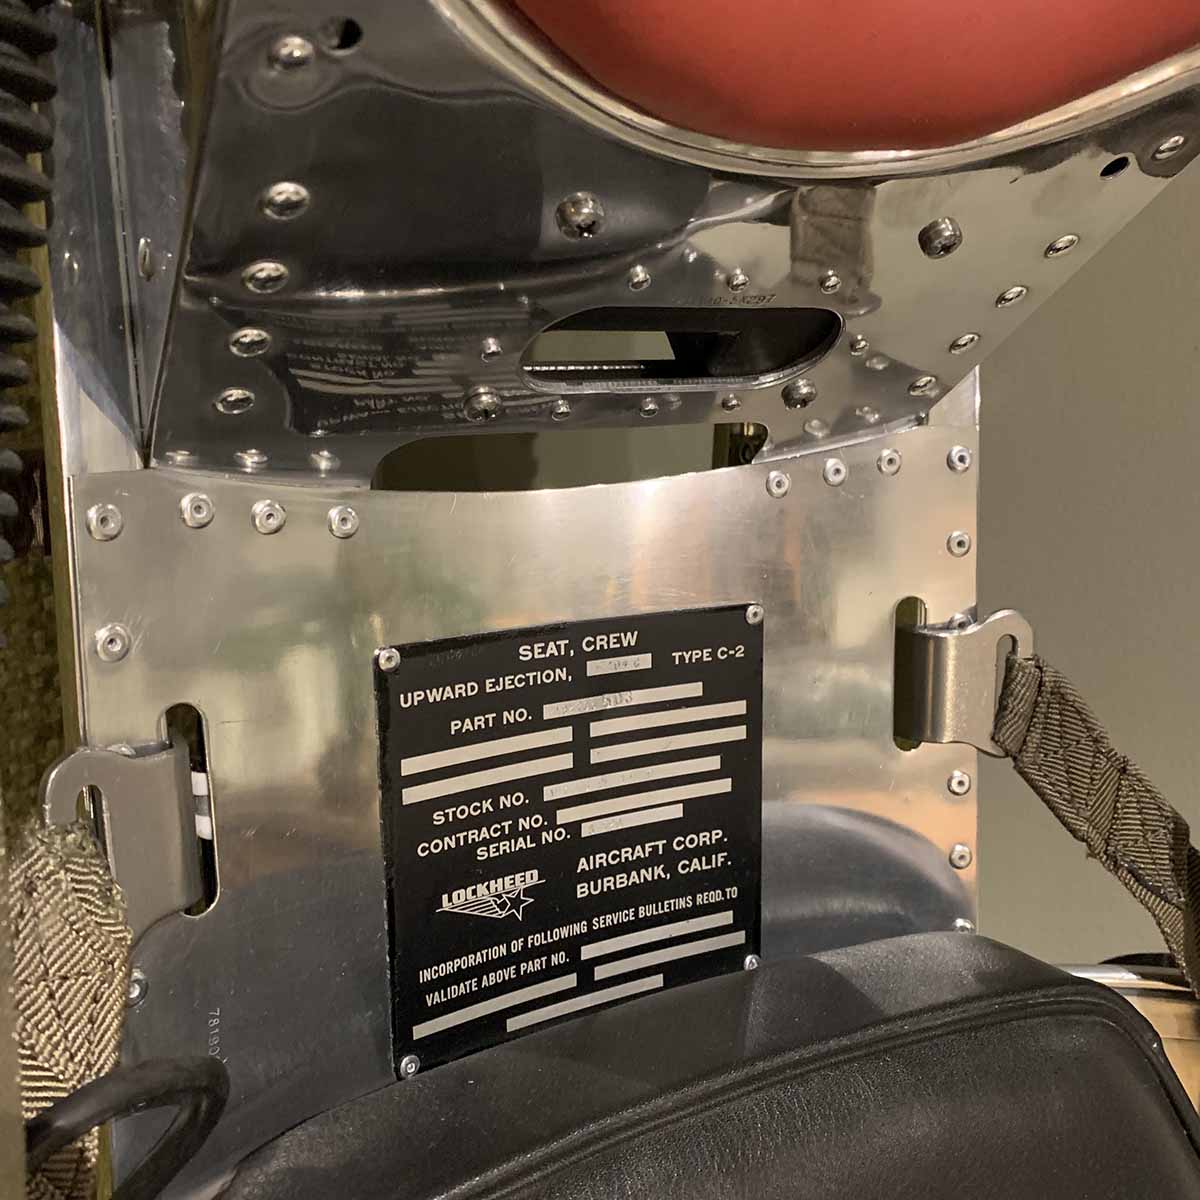 Identification plate on a polished Lockheed C2 ejection seat.